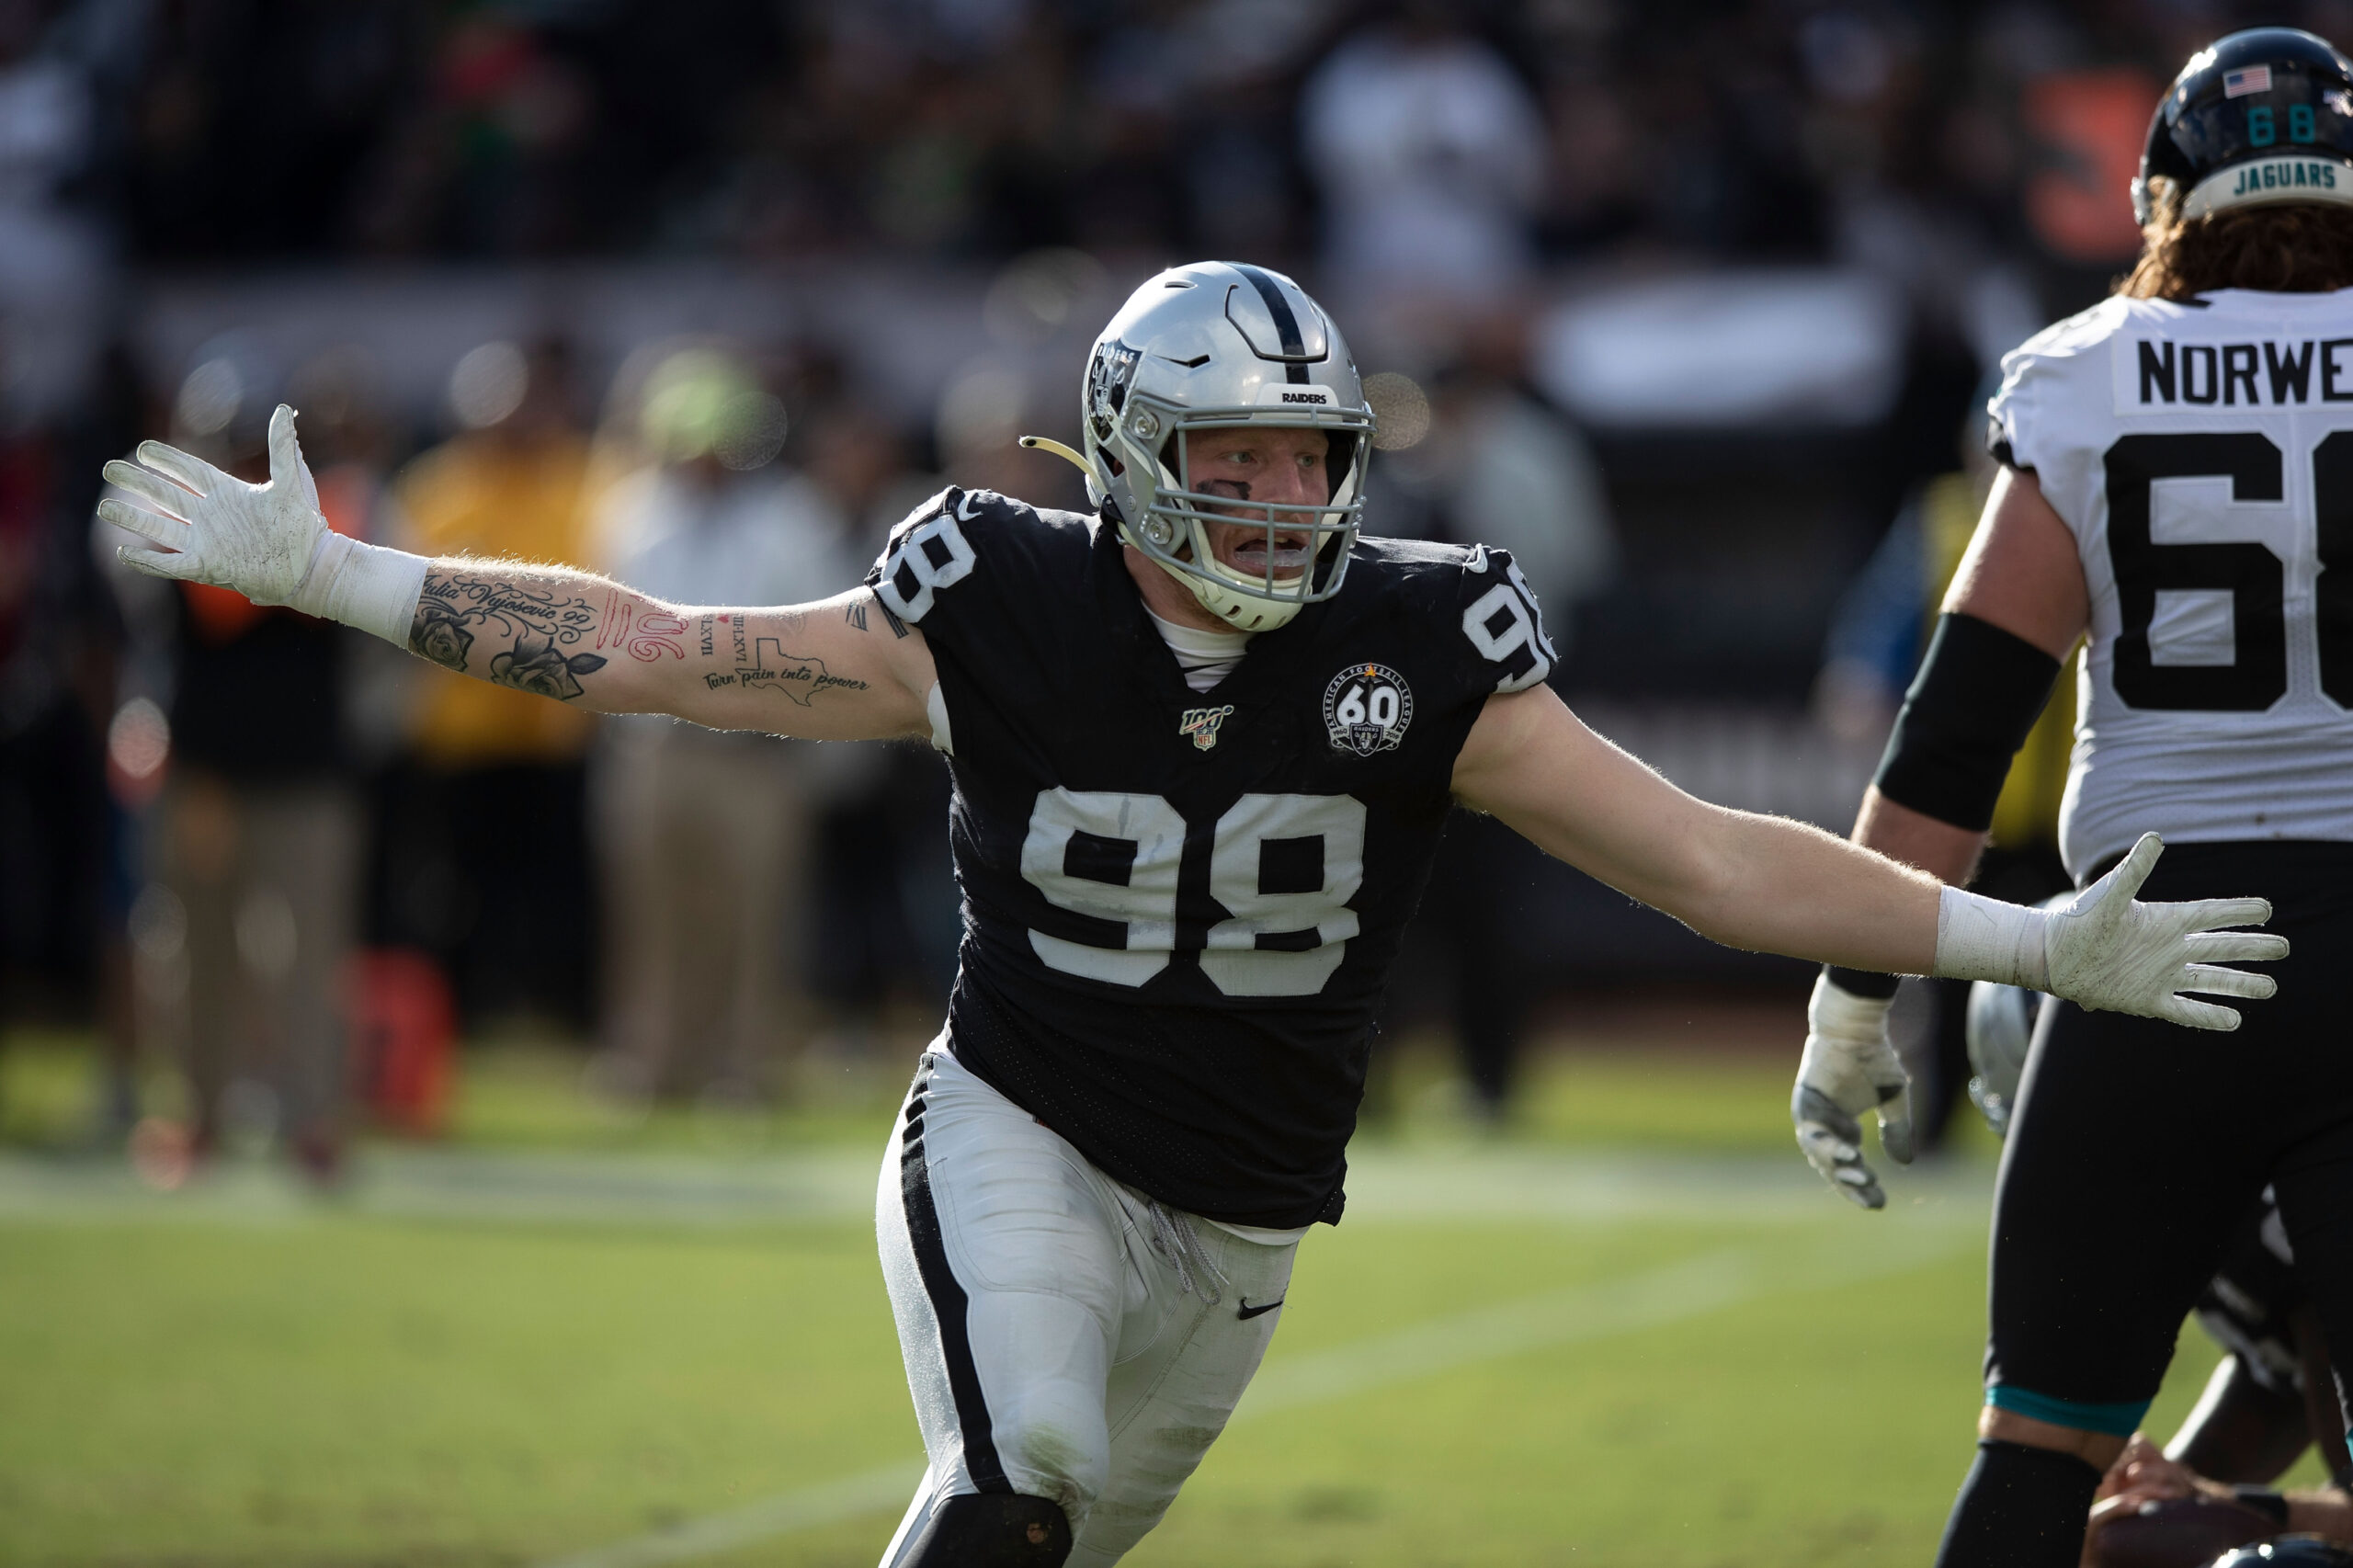 Raiders' Maxx Crosby doesn't want to be treated with kid gloves